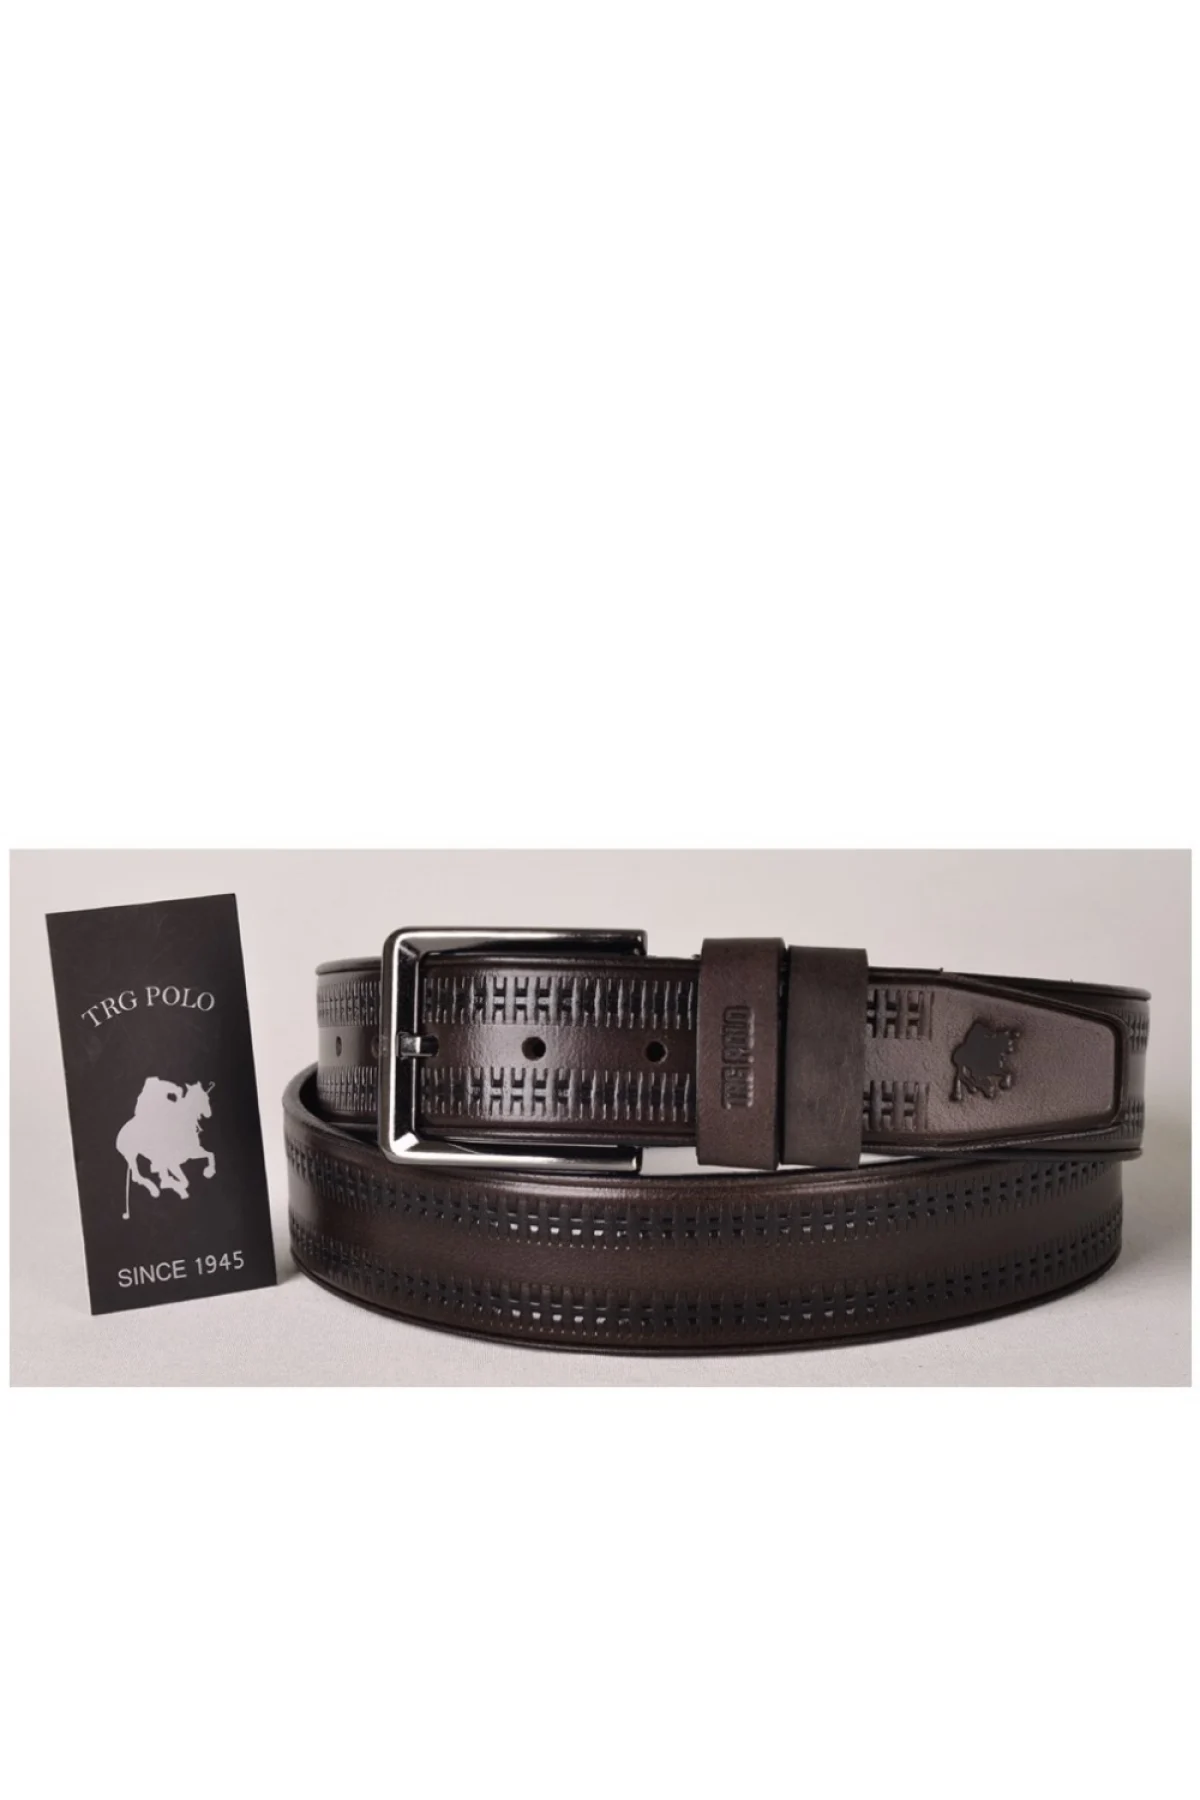 TRG POLO TRG0215 GENUINE LEATHER MEN BELT THREE DIFFERENT COLORS